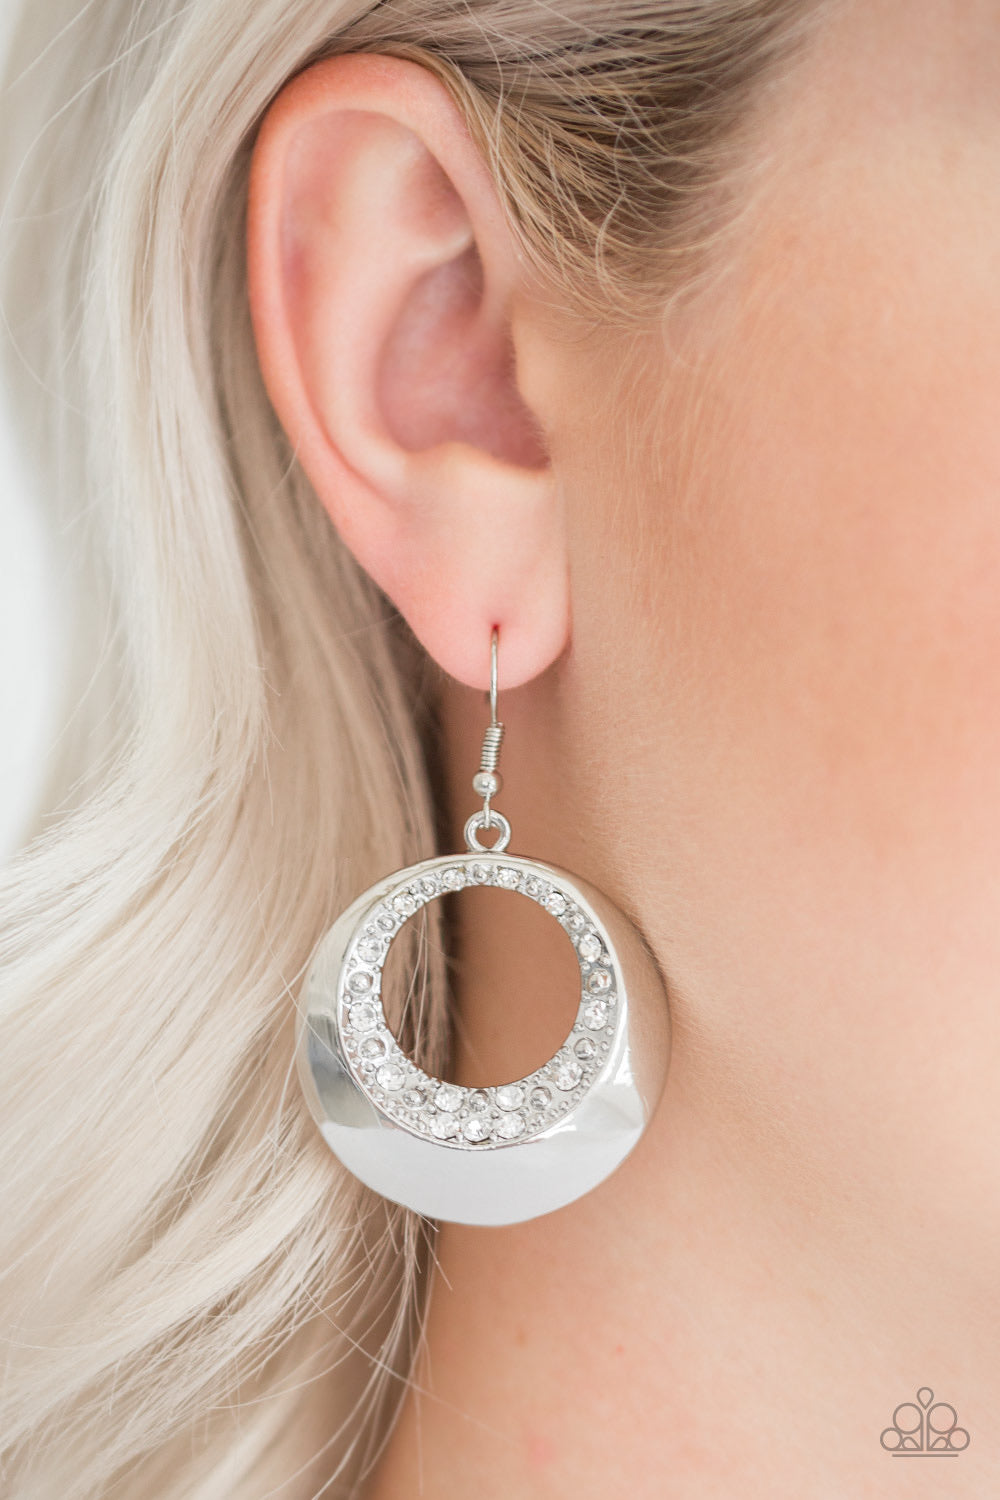 Ringed In Refinement White-Earrings